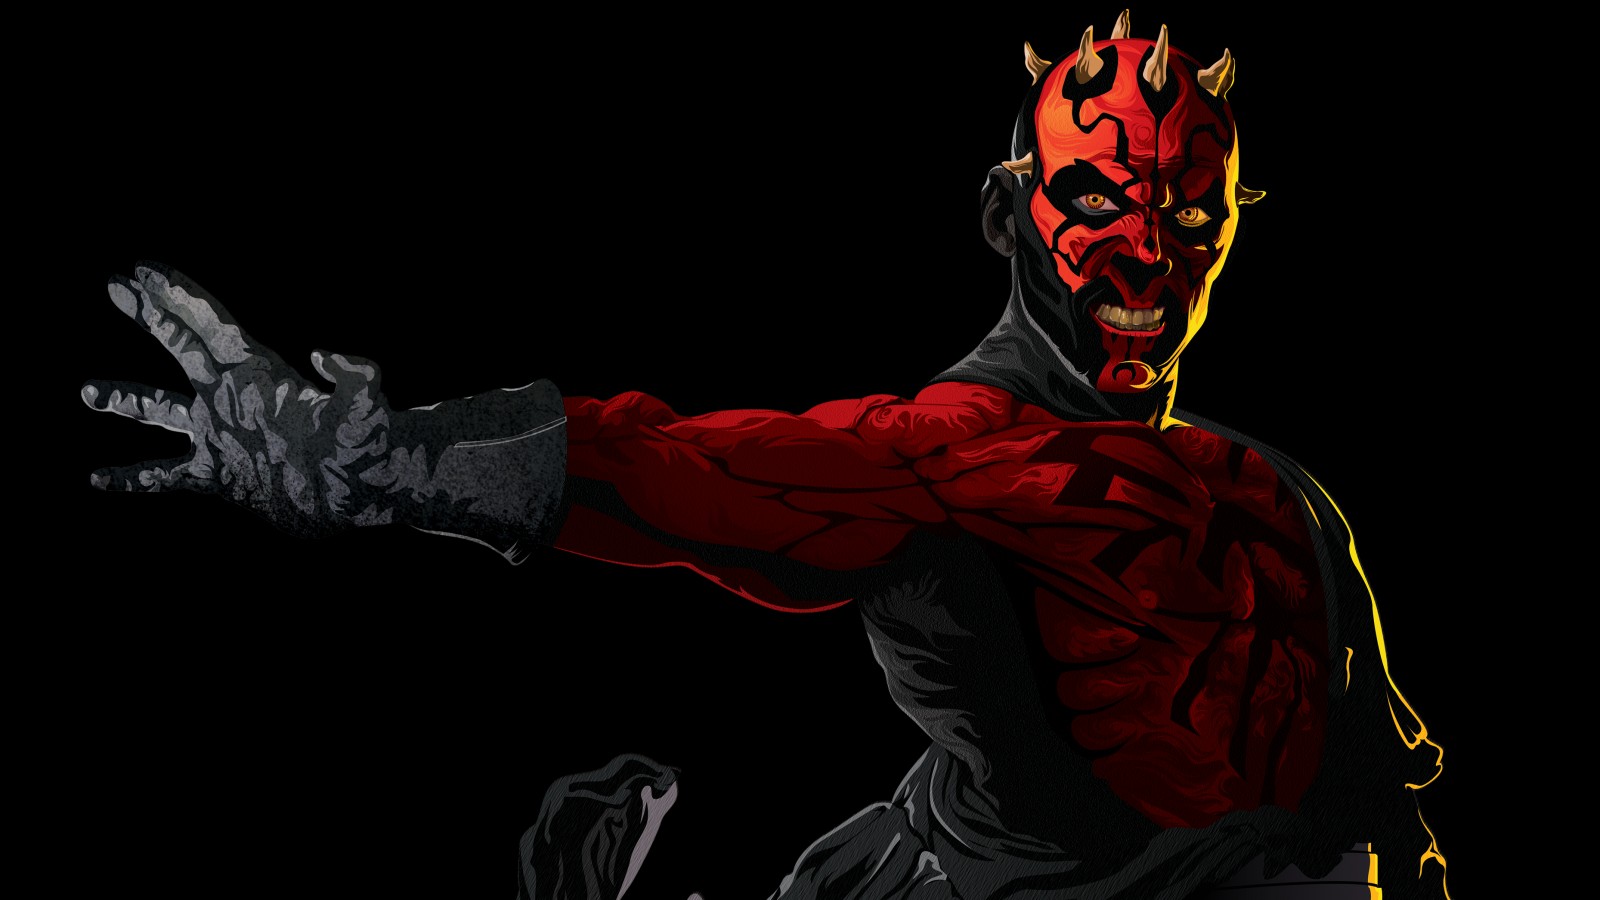 Download Darth Maul Images, Darth Maul Insidious Wallpaper - Illustration , HD Wallpaper & Backgrounds